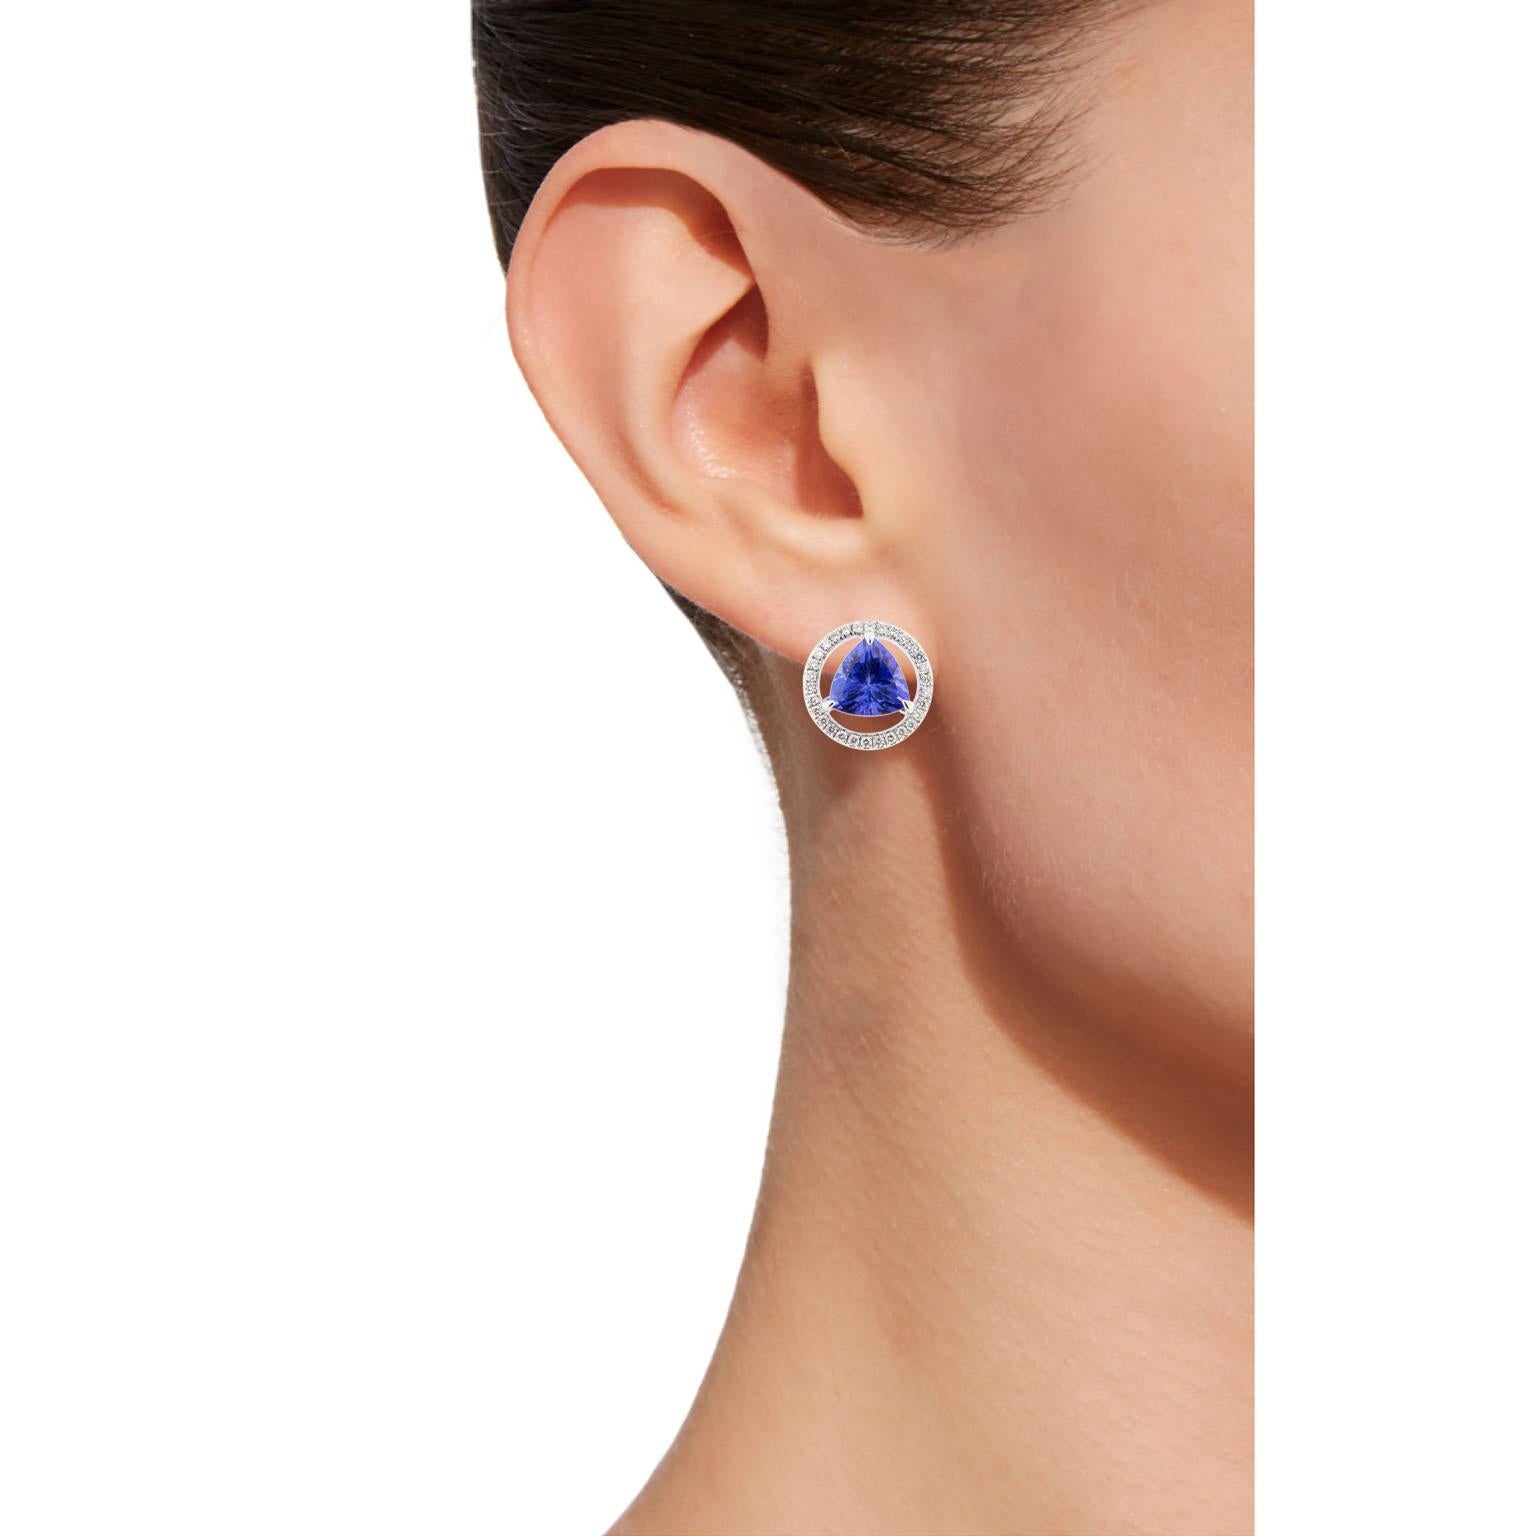 Jona design collection, hand crafted in Italy, 18 karat white gold stud earrings set with two triangle cut Tanzanite weighing 3.94 carats, surrounded by 60 brilliant cut white diamonds, F COLOR, VVS1 clarity weighing 0.39 carats.
Dimensions: